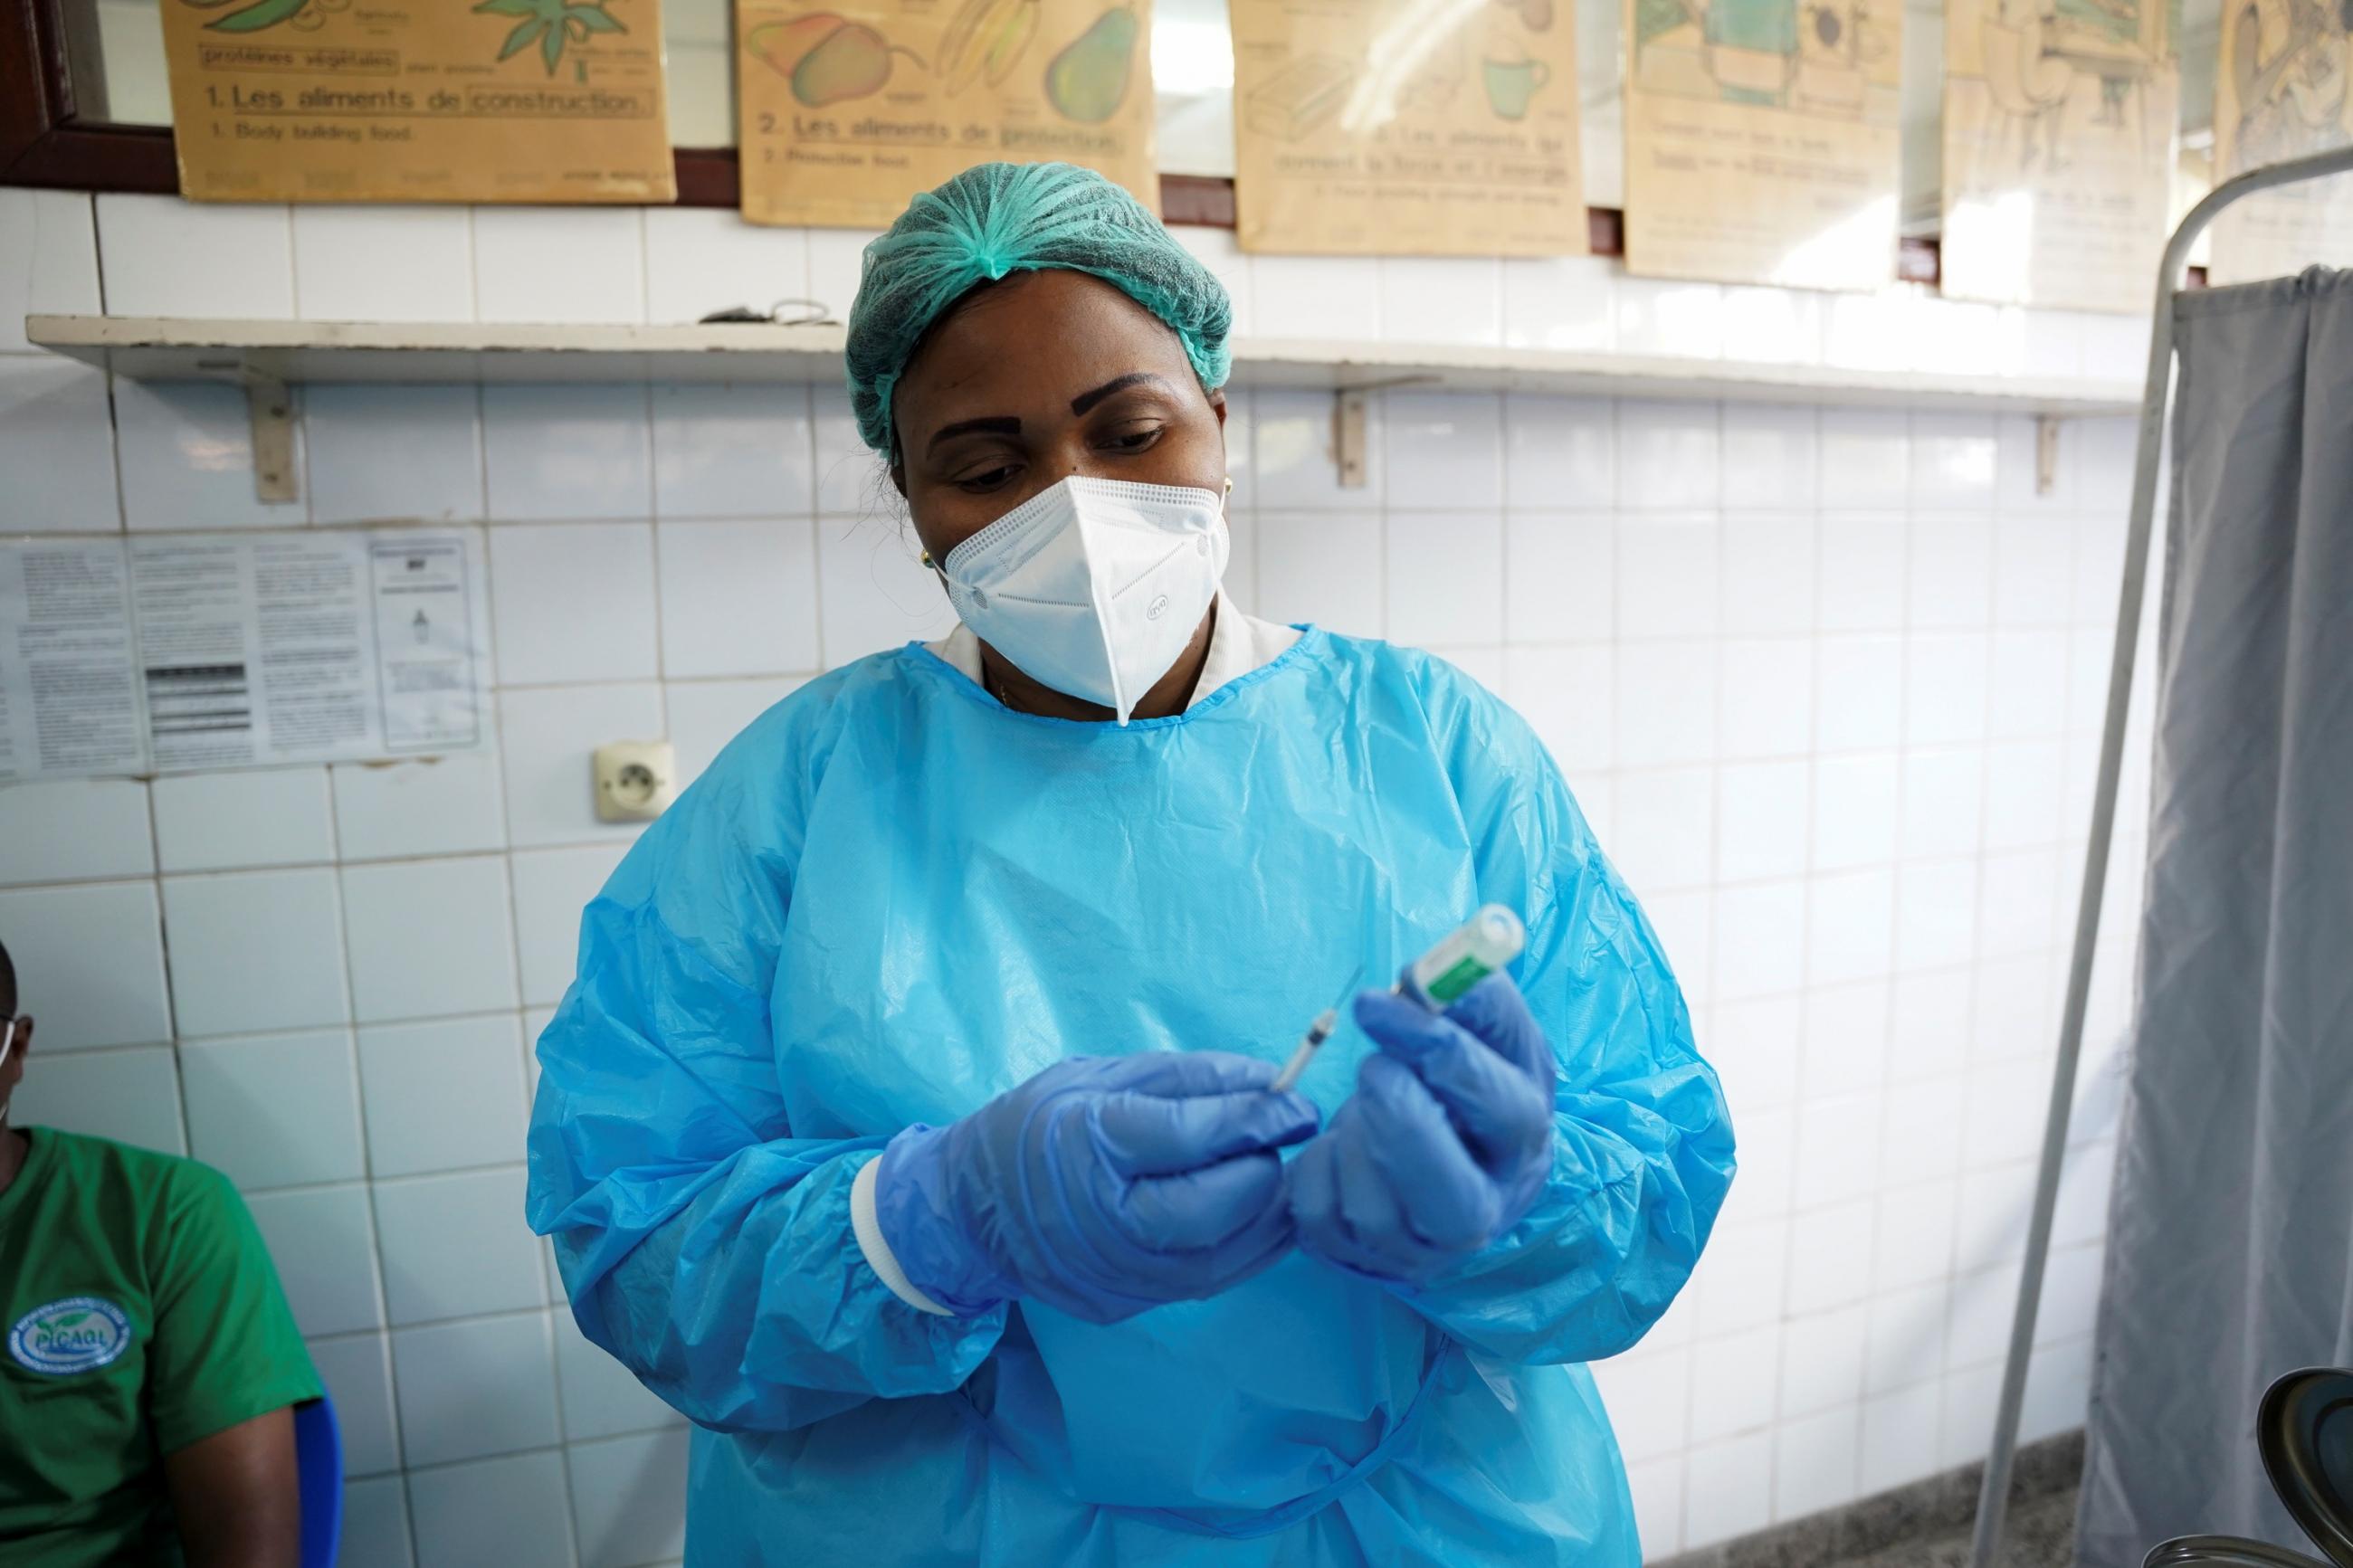 A nurse in a blue protective suit, white mask, and green hair net prepares a COVID-19 vaccine at the Ngaliema Clinic in Kinshasa, Democratic Republic of Congo, April 29, 2021.